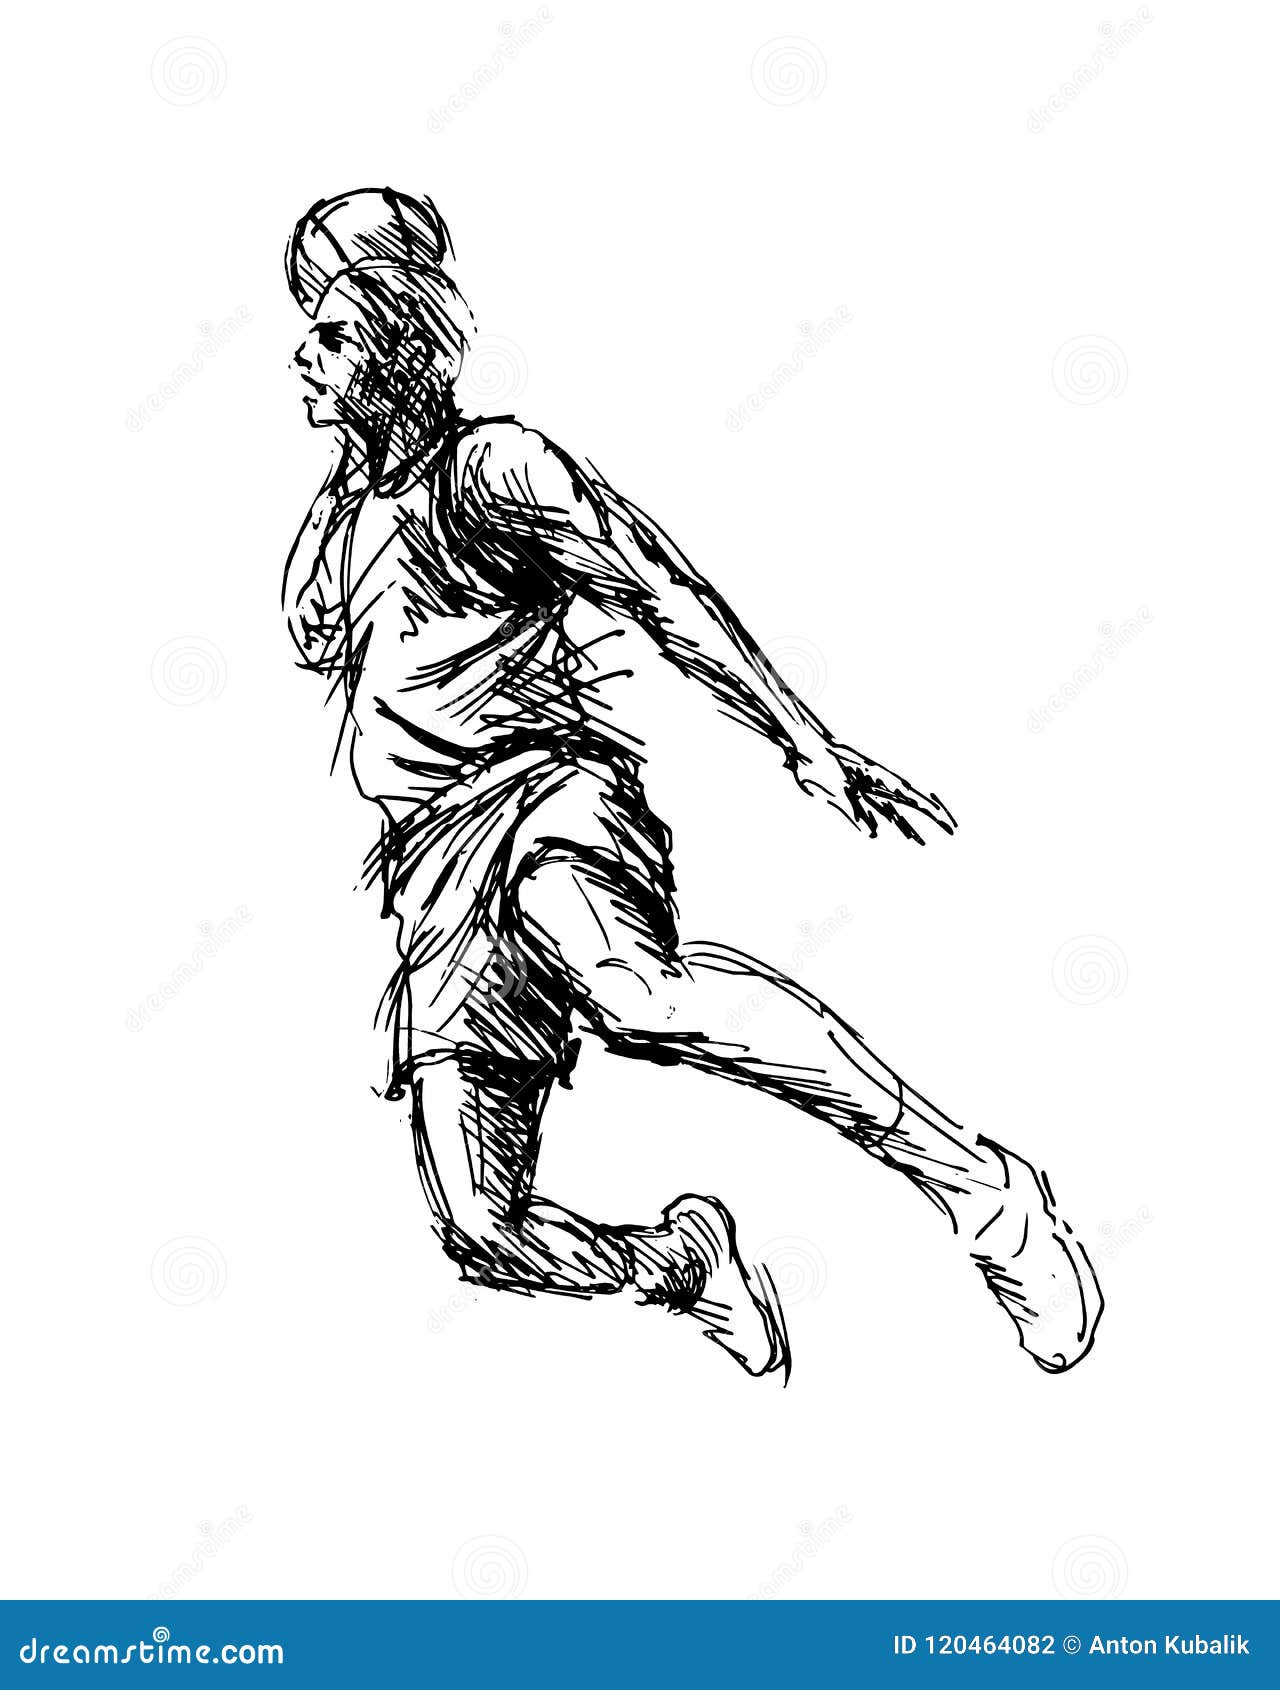 Hand Sketch of Basketball Player Stock Vector - Illustration of ...